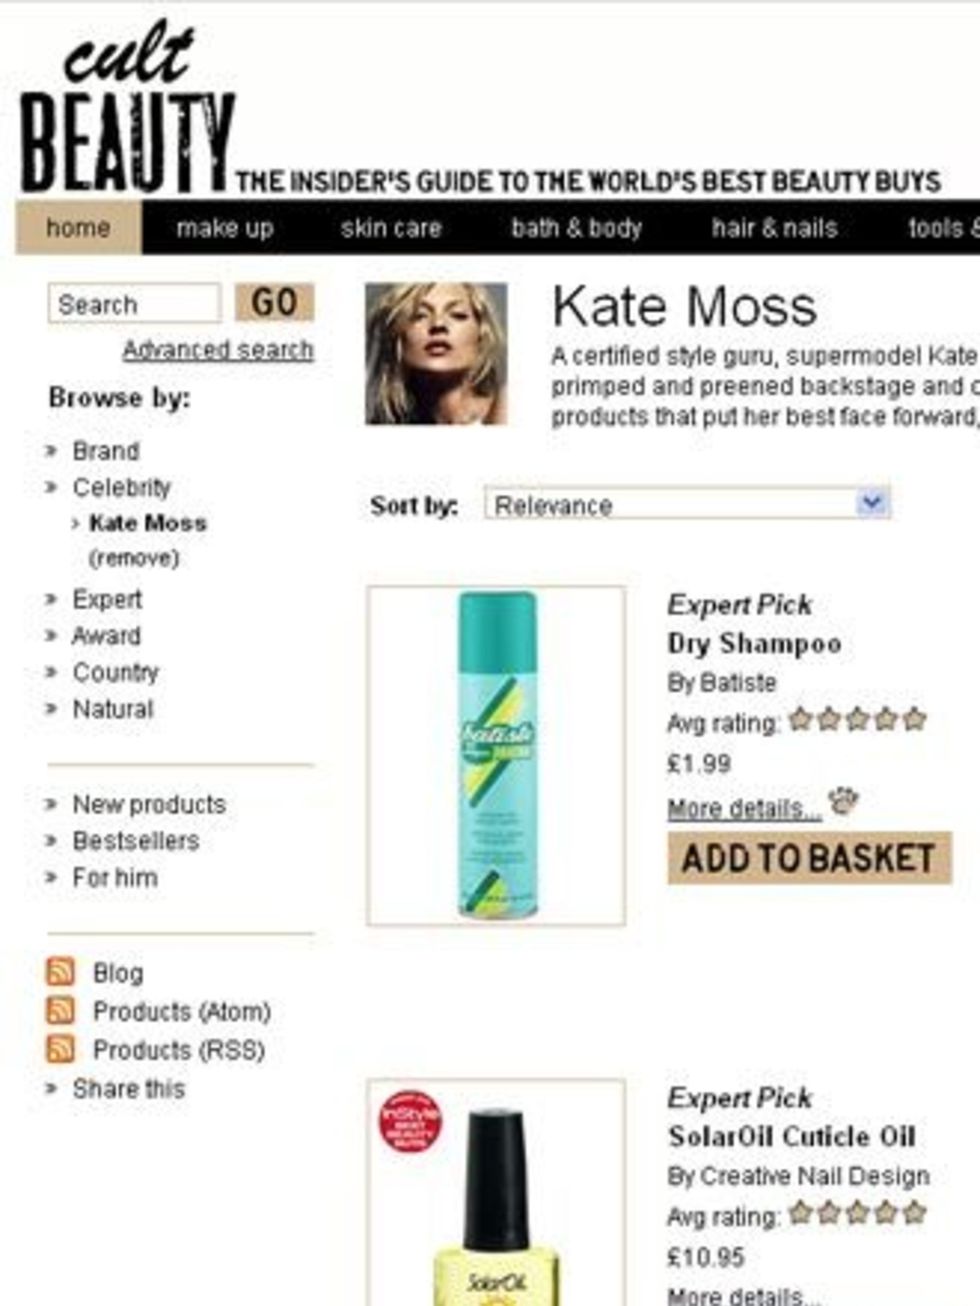 <p>Like most websites Cult Beauty sorts their wares into easily searchable categories and their brand list is pretty impressive including <a href="http://www.elleuk.com/find/%28term%29/essie">Essie</a>, Becca and <a href="http://www.elleuk.com/find/%28ter